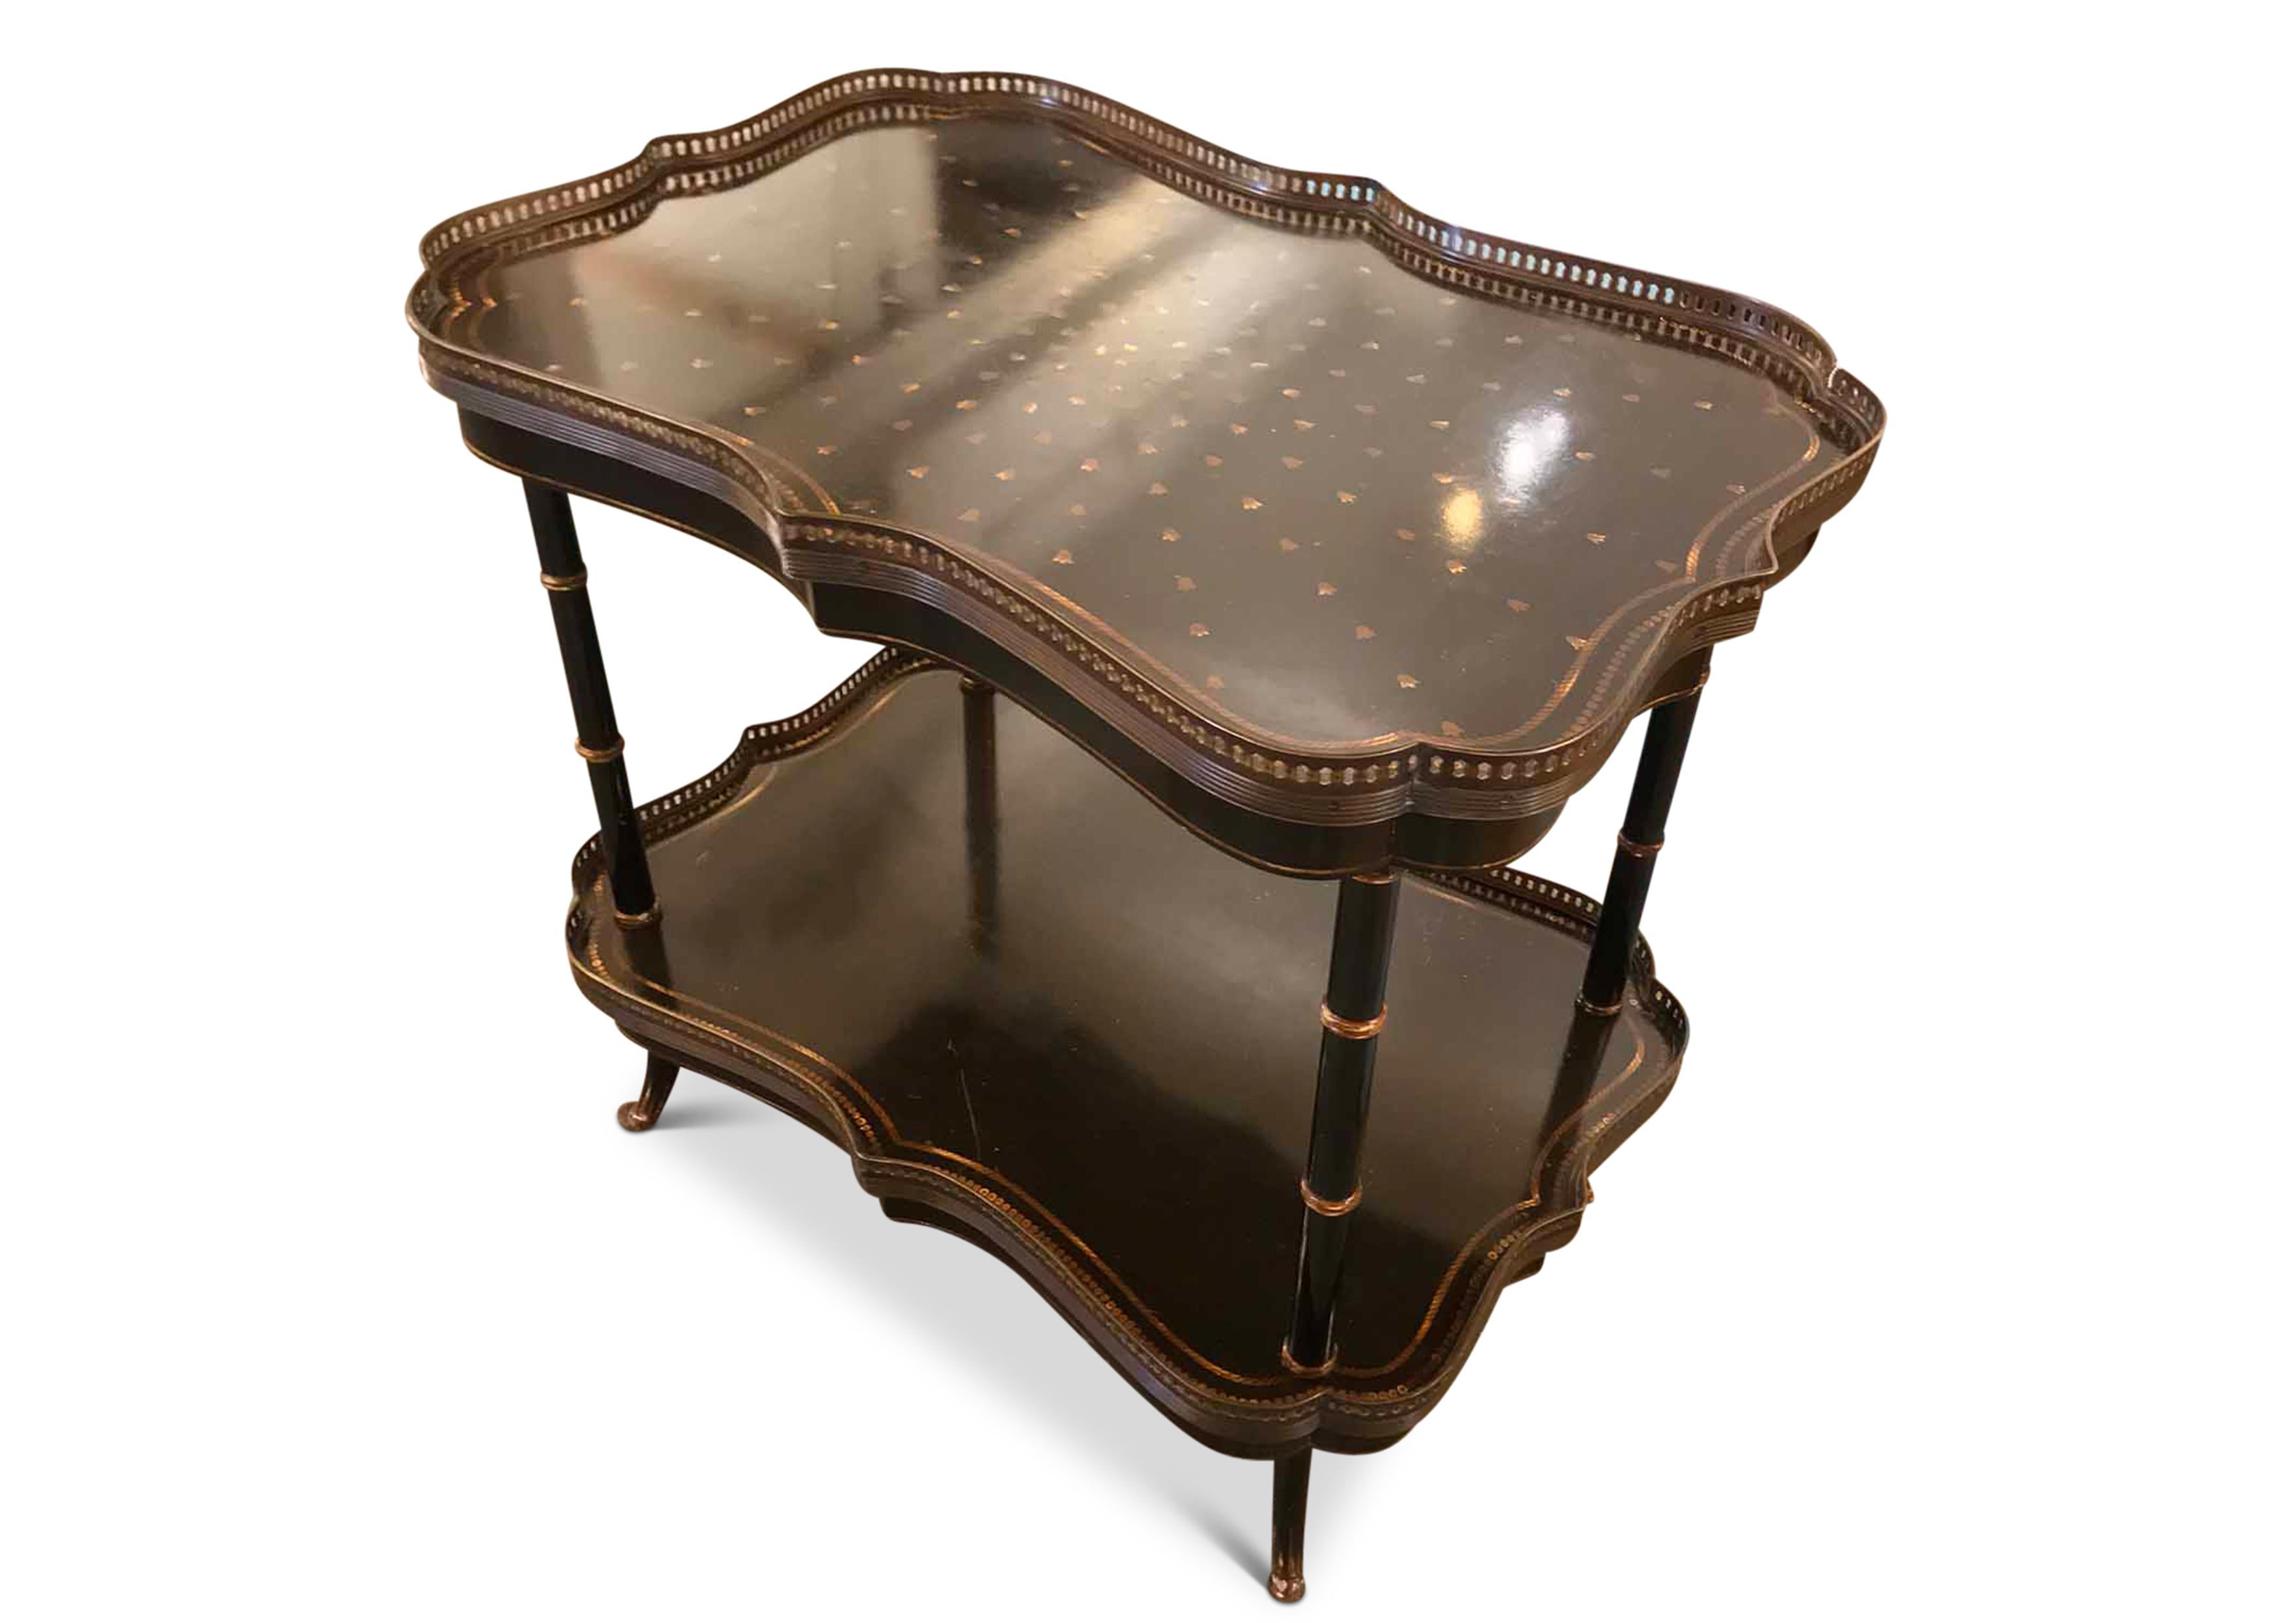 20th Century Two Tier Painted Faux Bamboo Style Ebonized Étagére with Decorative Brass Edges